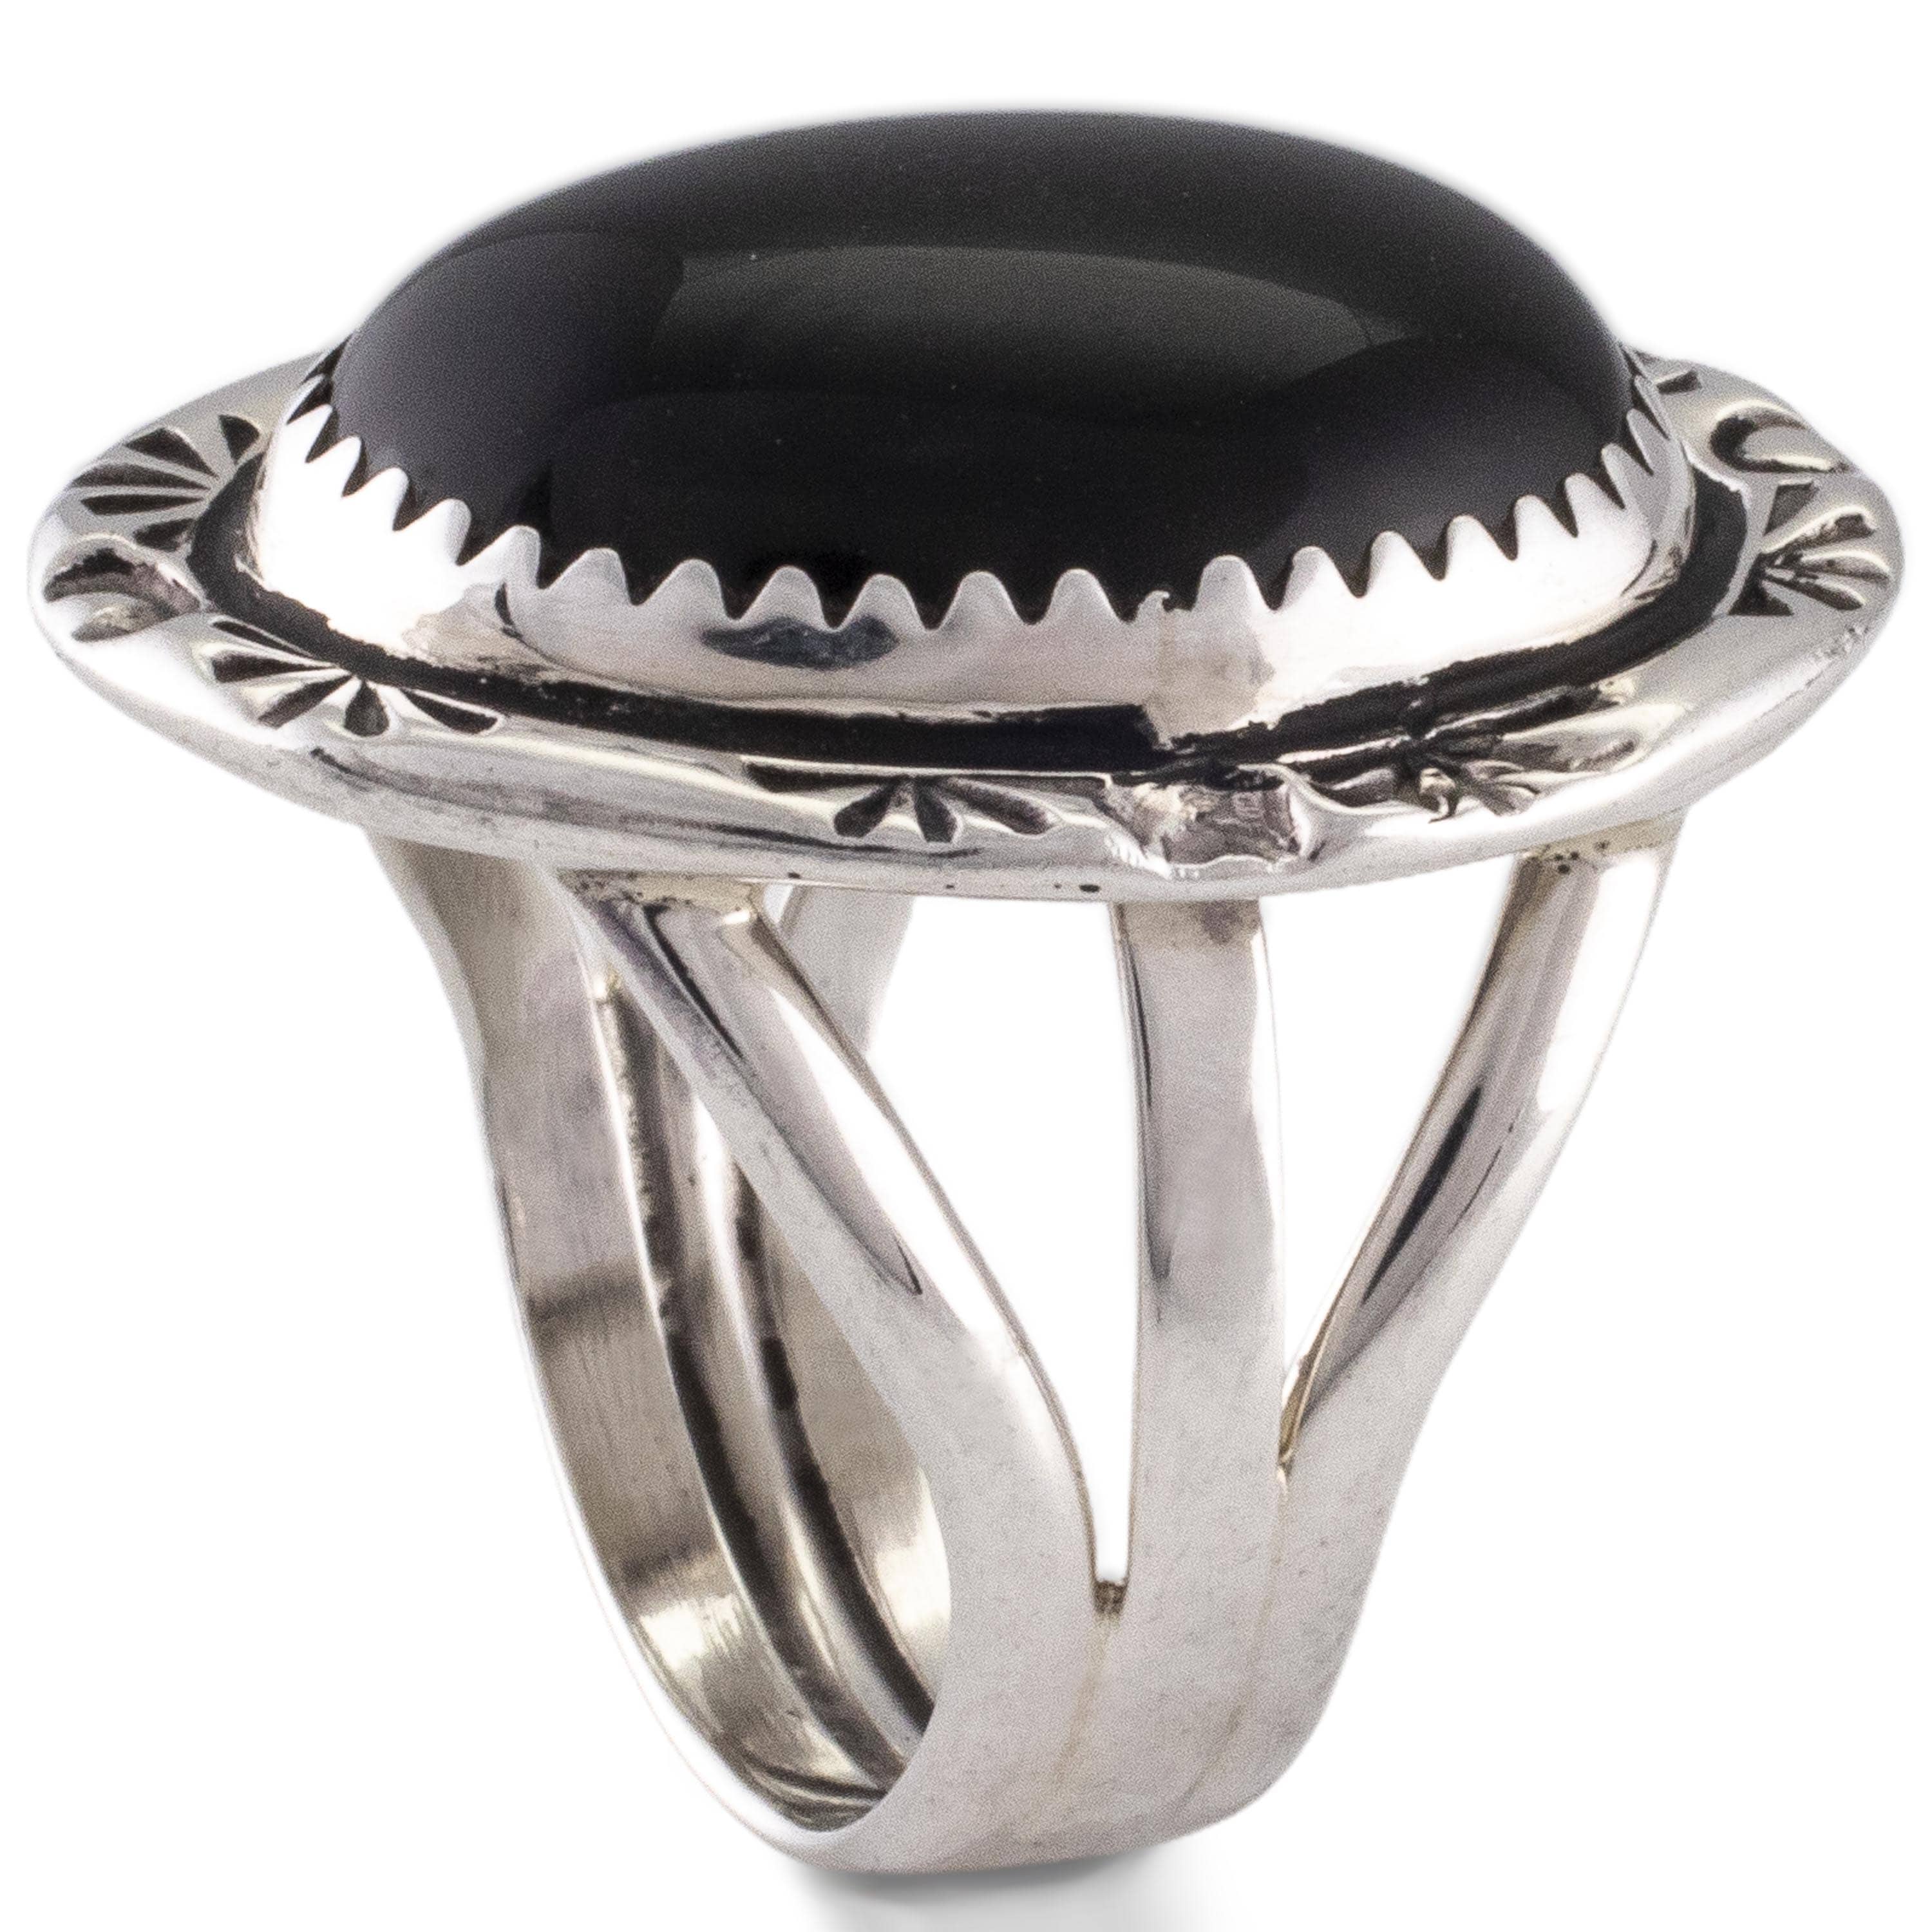 Black Onyx 925 Silver Plated Ethnic Handmade Jewelry Ring US Size 7 R-18335